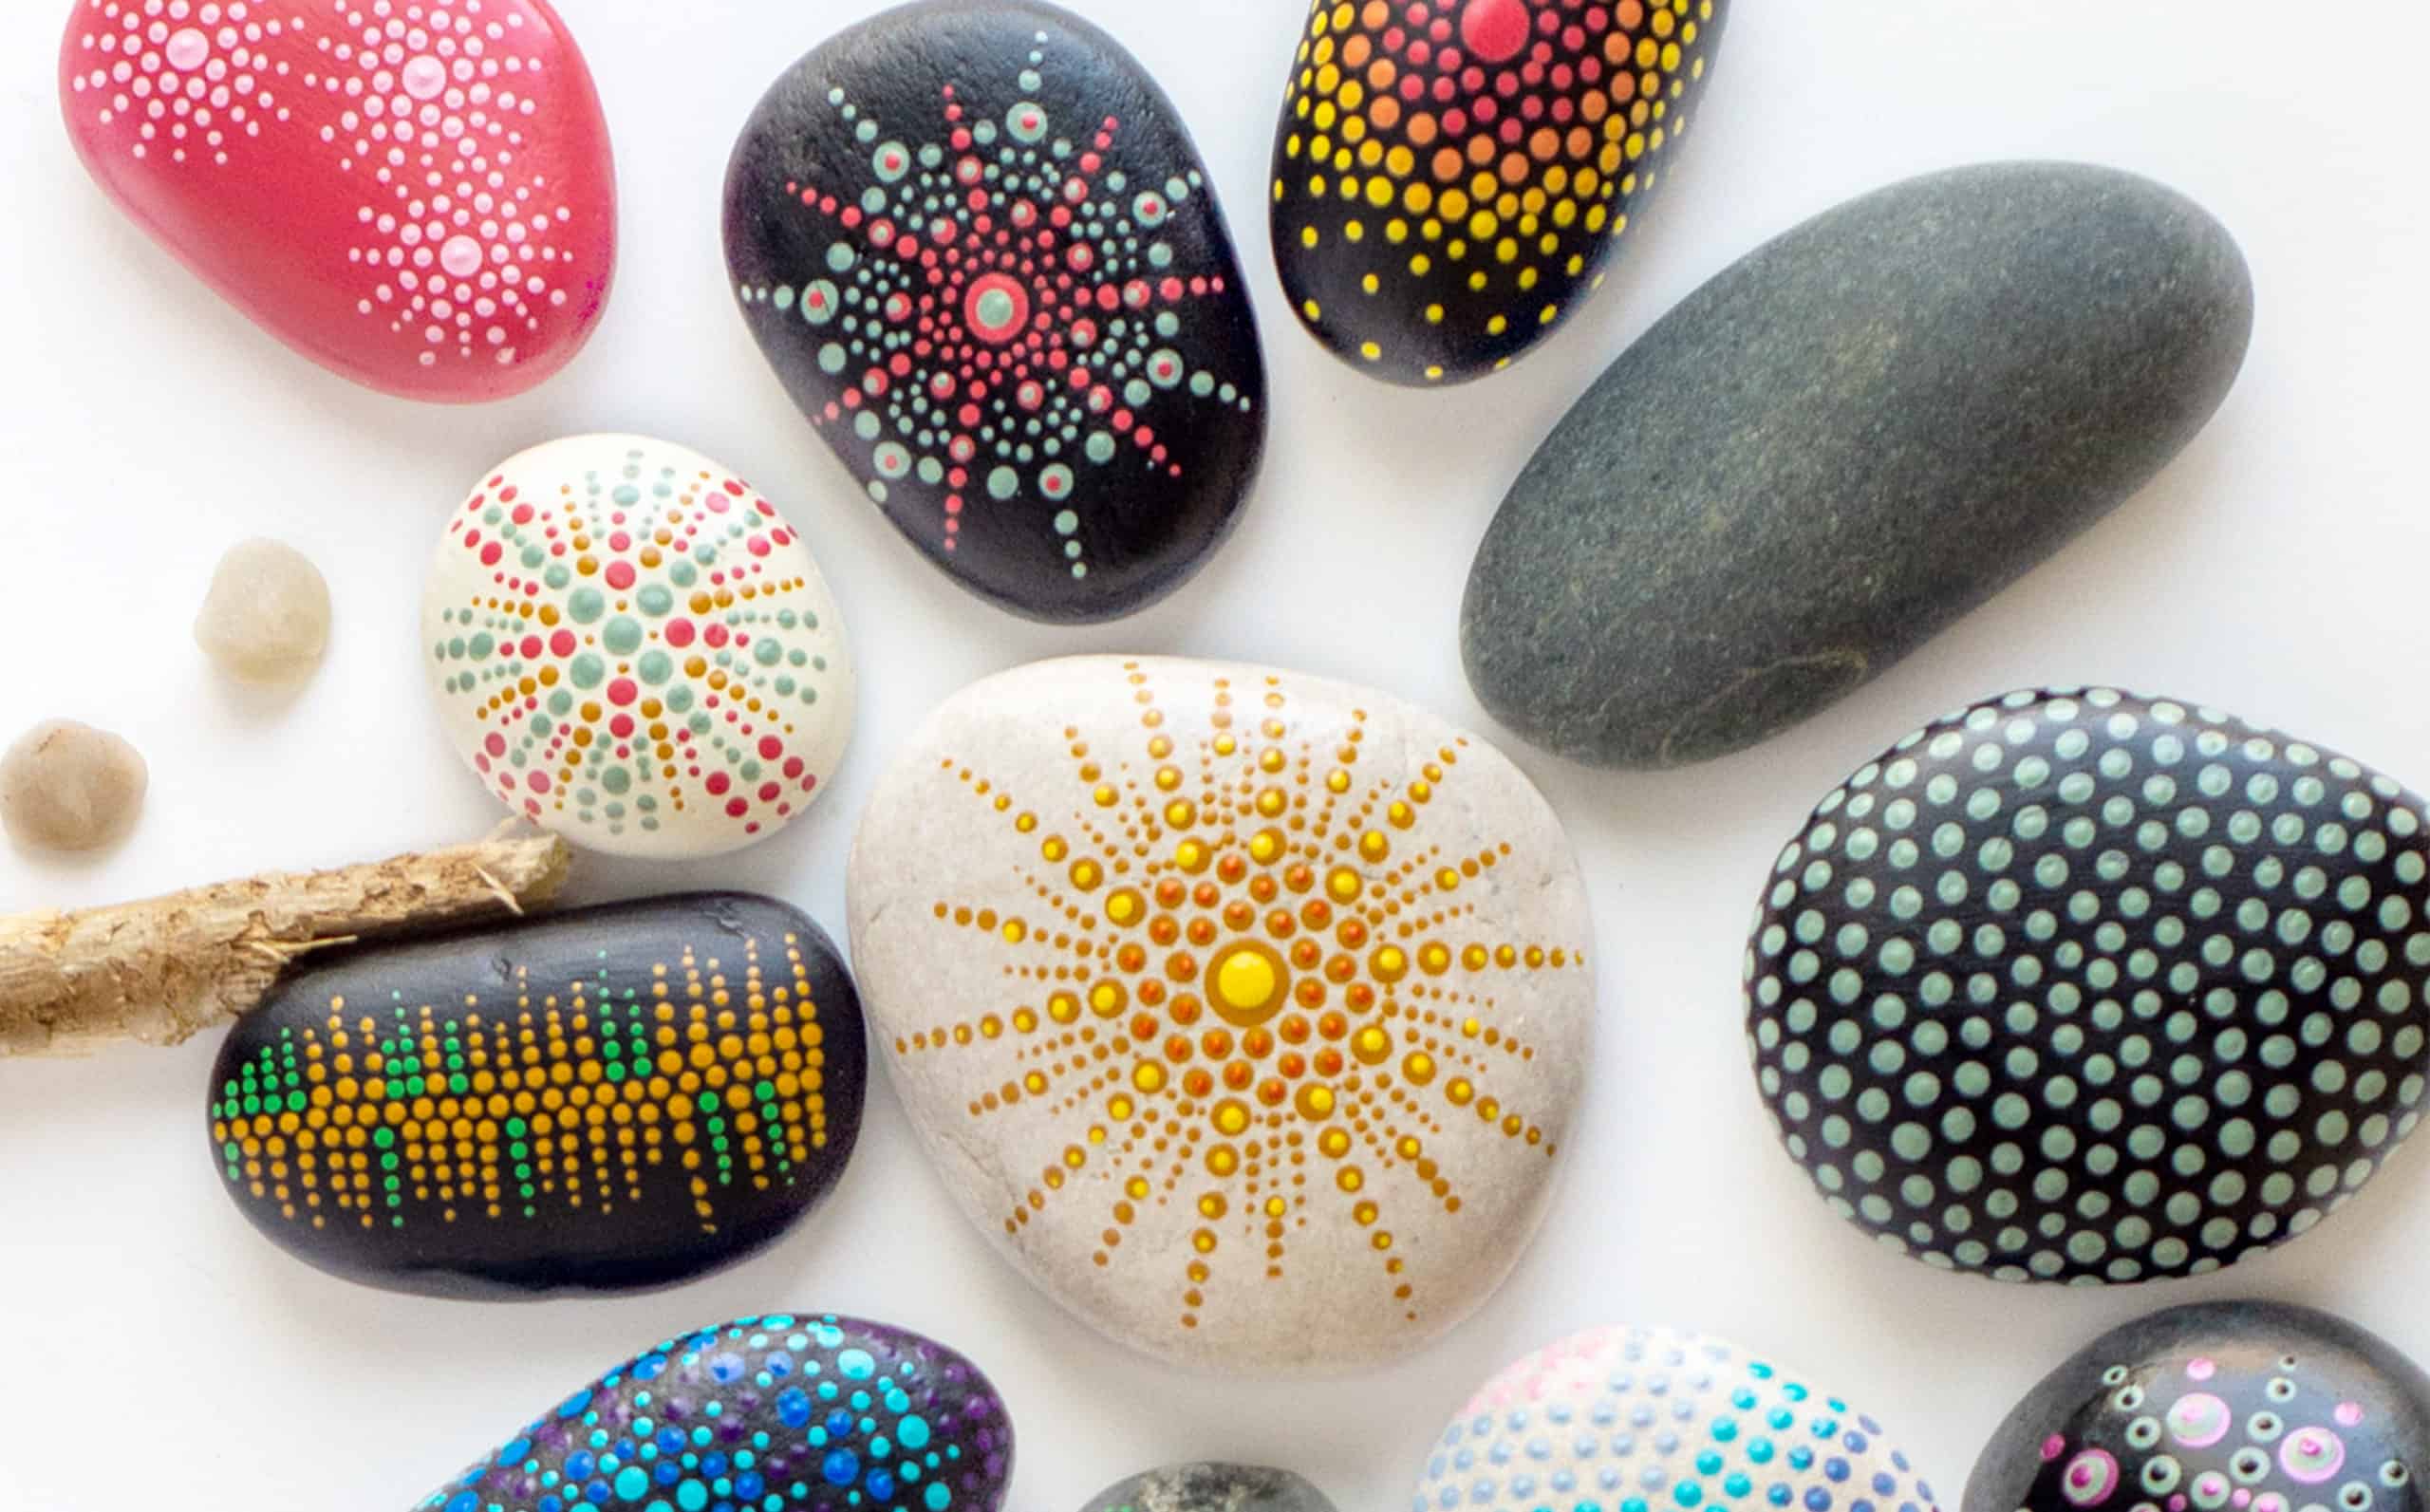 Dots on Rocks - A painting craft for everyday rocks